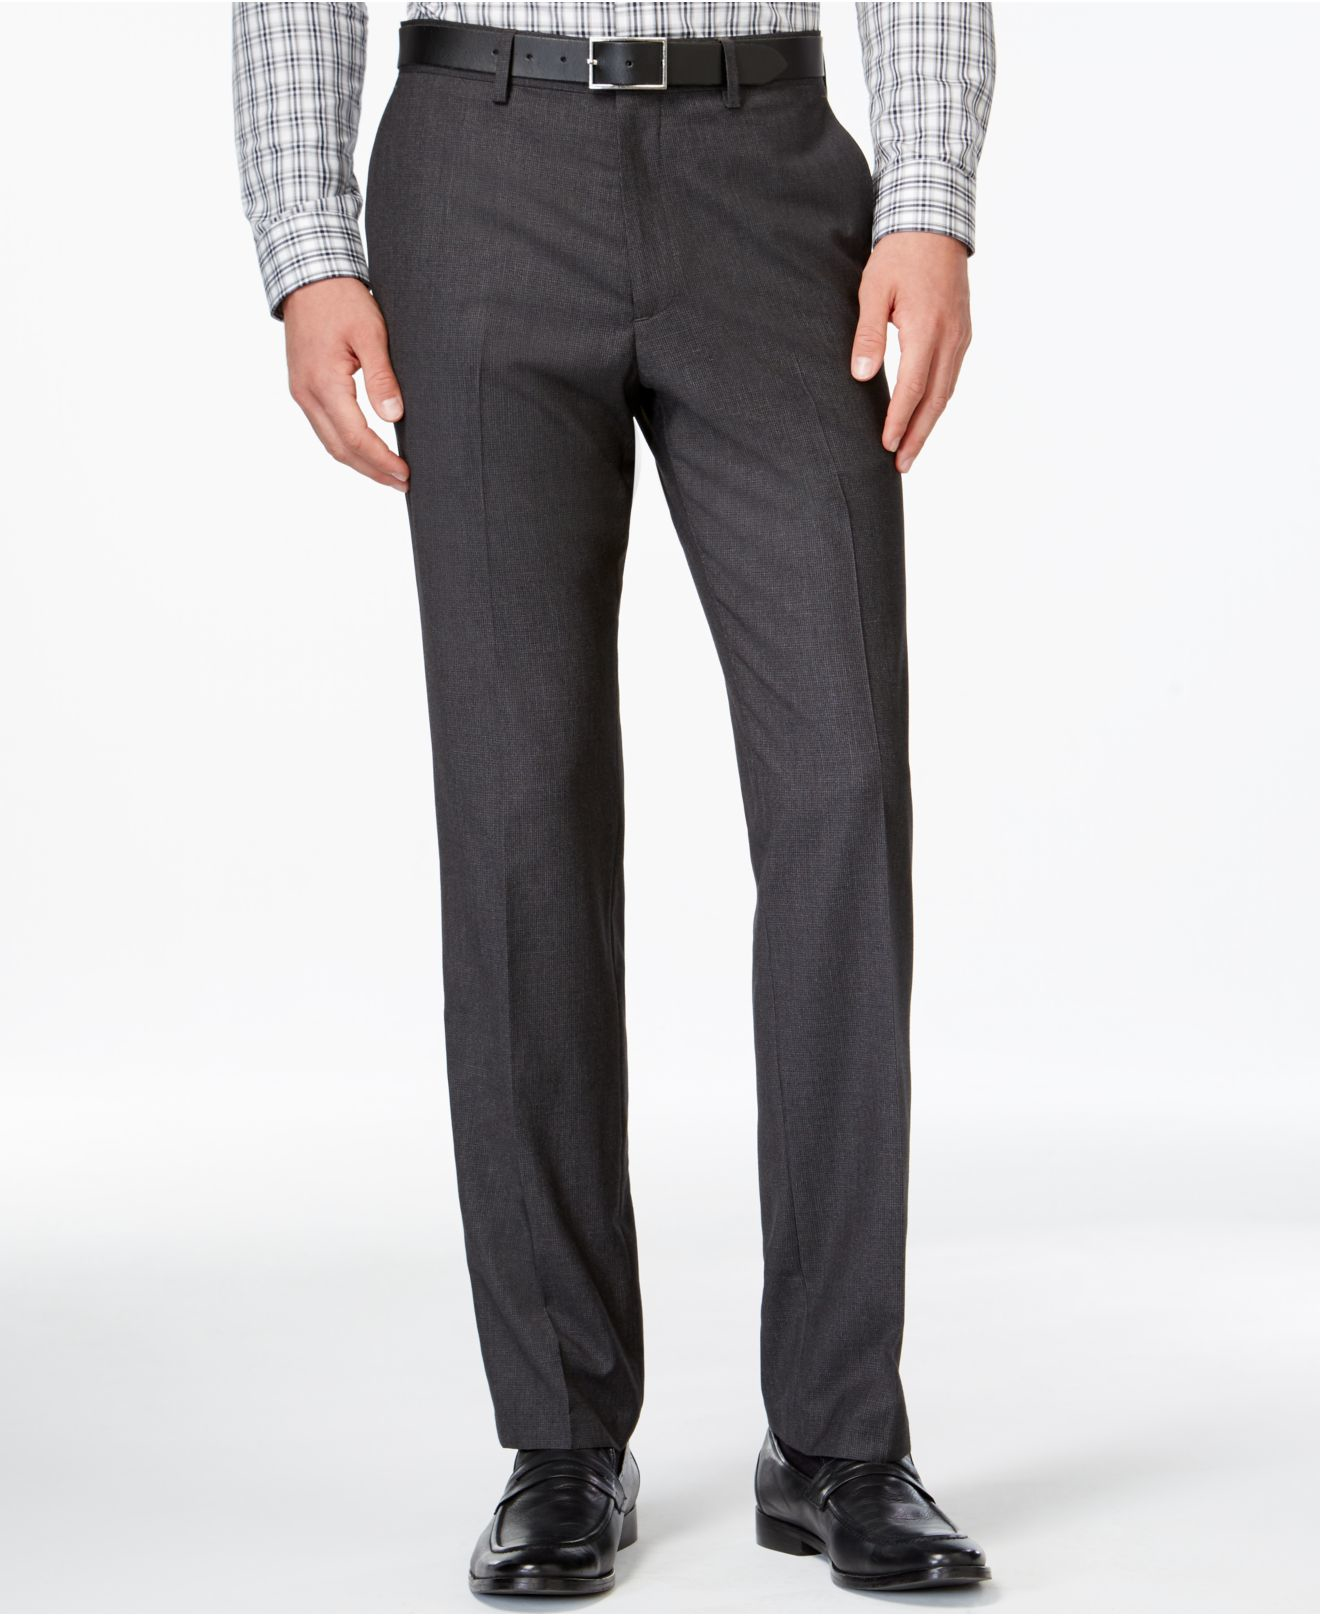 Lyst - Kenneth Cole Reaction Micro Grid Slim Fit Dress Pants in Gray ...